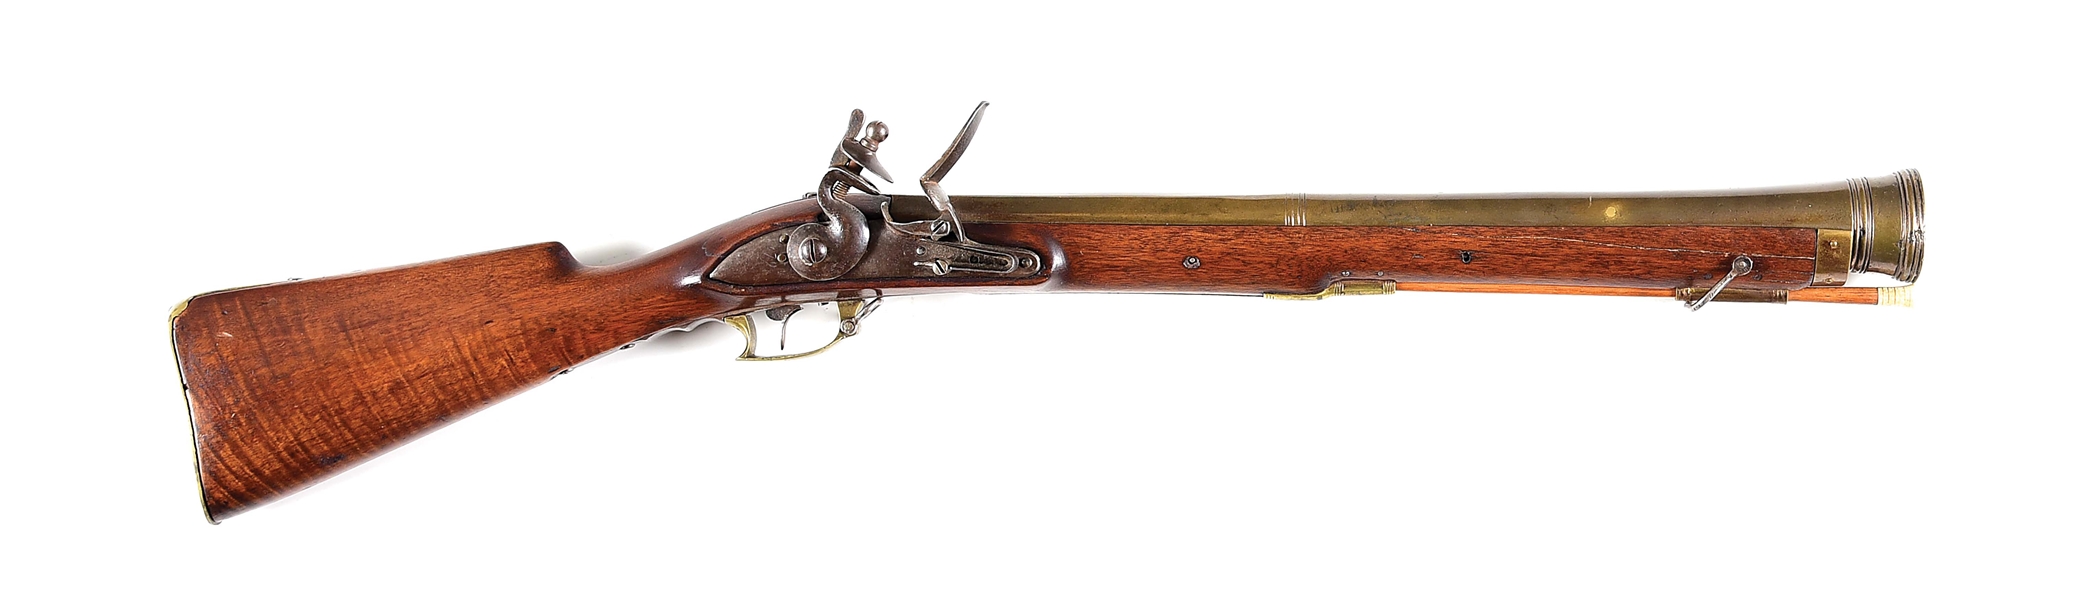 (A) A GOOD, EARLY, PROBABLY ENGLISH FLINTLOCK BLUNDERBUSS IN AN UNUSUALLY LARGE SIZE. 